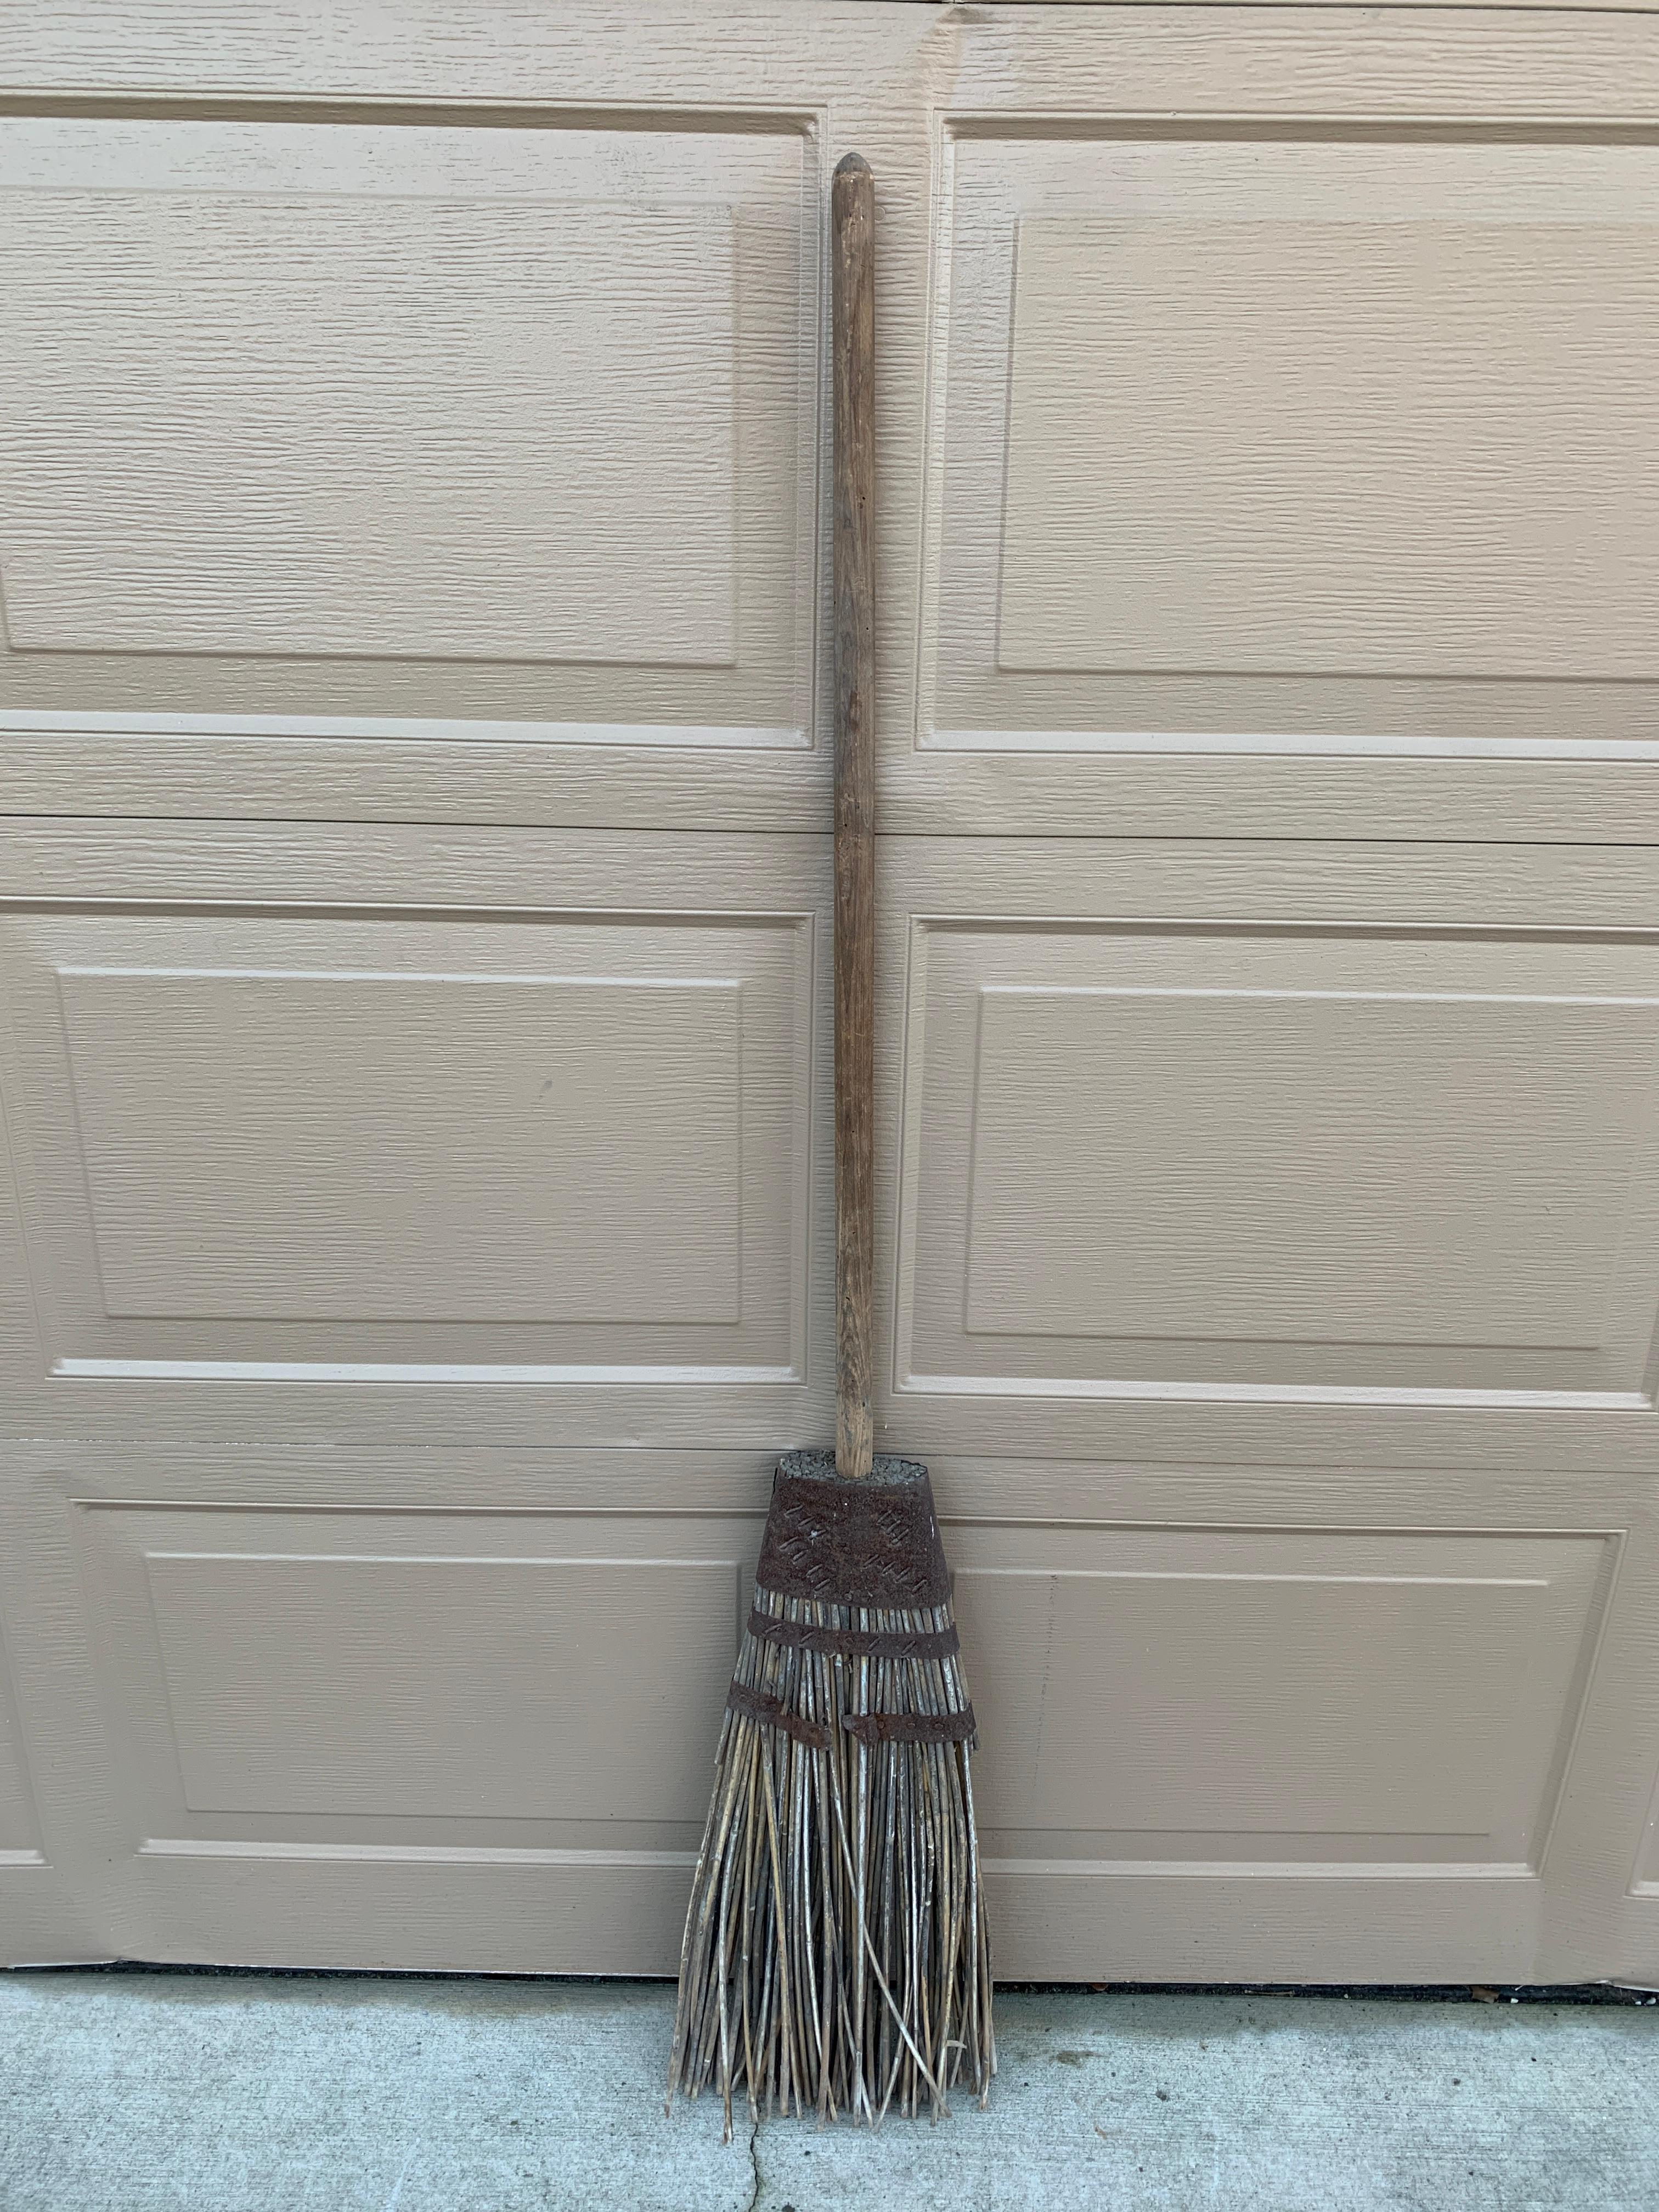 A beautiful and rare antique rustic, farmhouse, or country wooden hand made broom. The broom is made from twigs and would make a gorgeous addition to your country house, Hampton's home, or farmhouse. This would be ideal for an installation on a wall